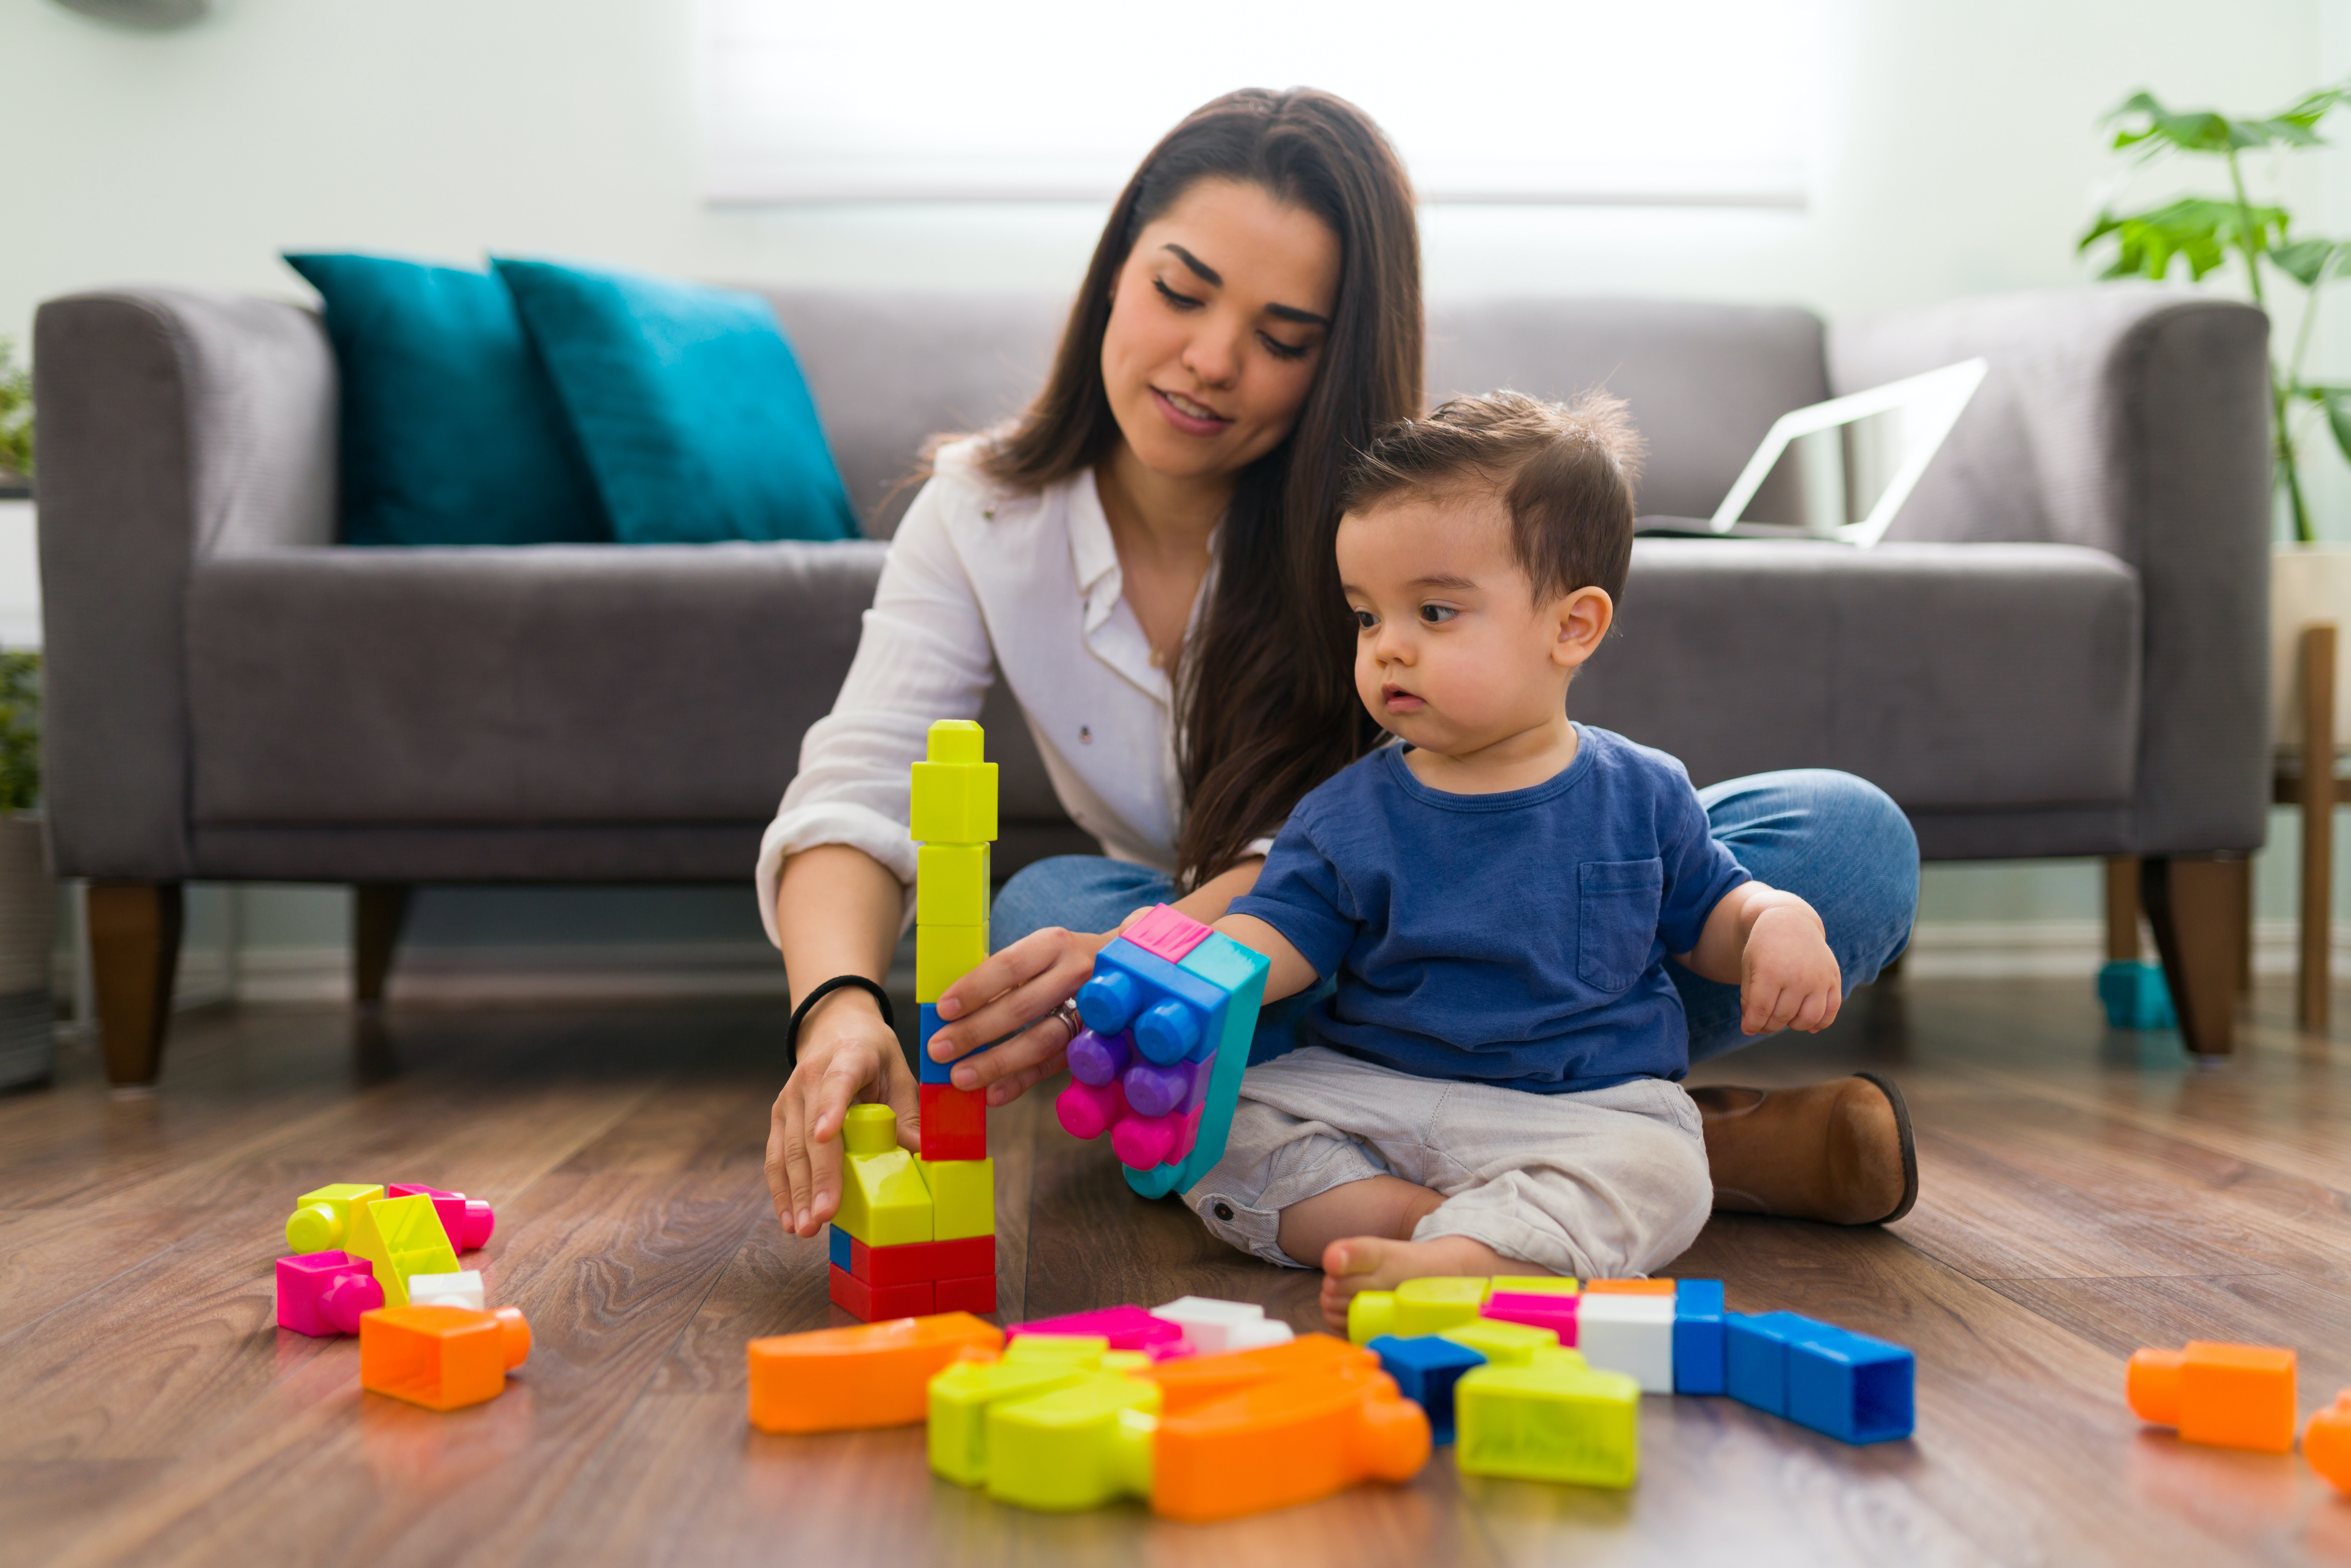 Calling all Career Nannies!  Full Time Nanny Needed in the Palisades for 14 month old little boy!  $30-$40/hr